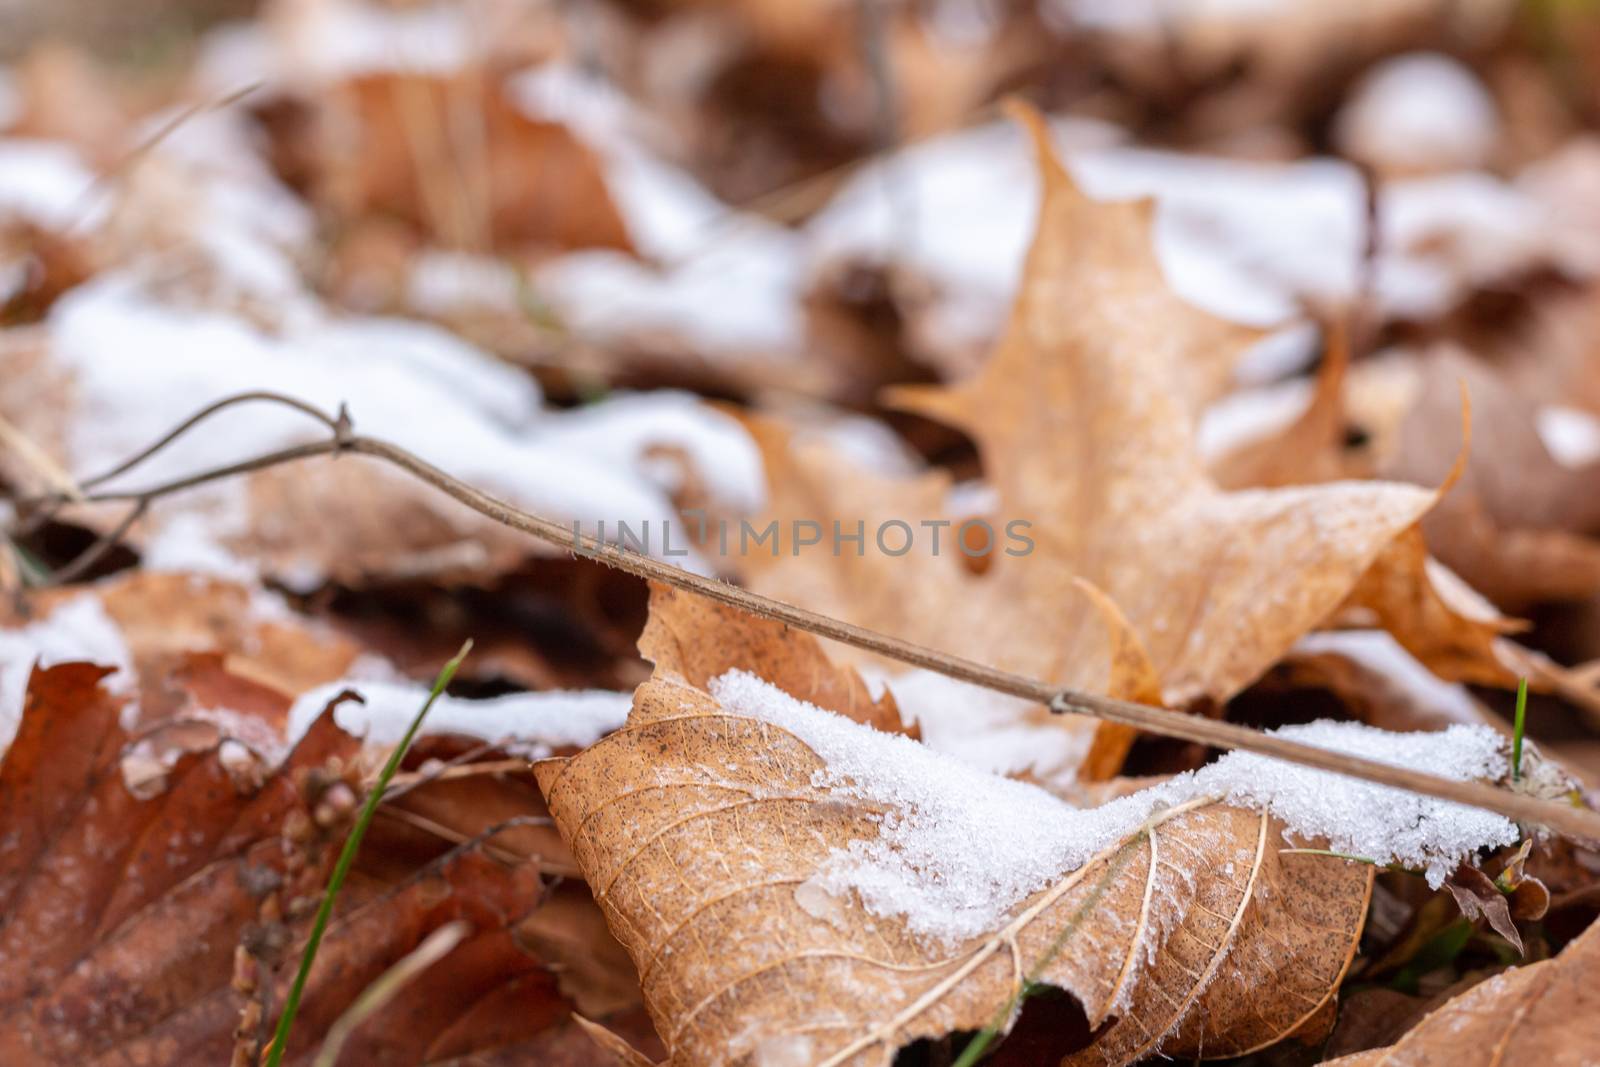 As the season begins to change, the first signs of winter emerge as a light snowfall has left deposits of white snow on top of dried up maple leaves.